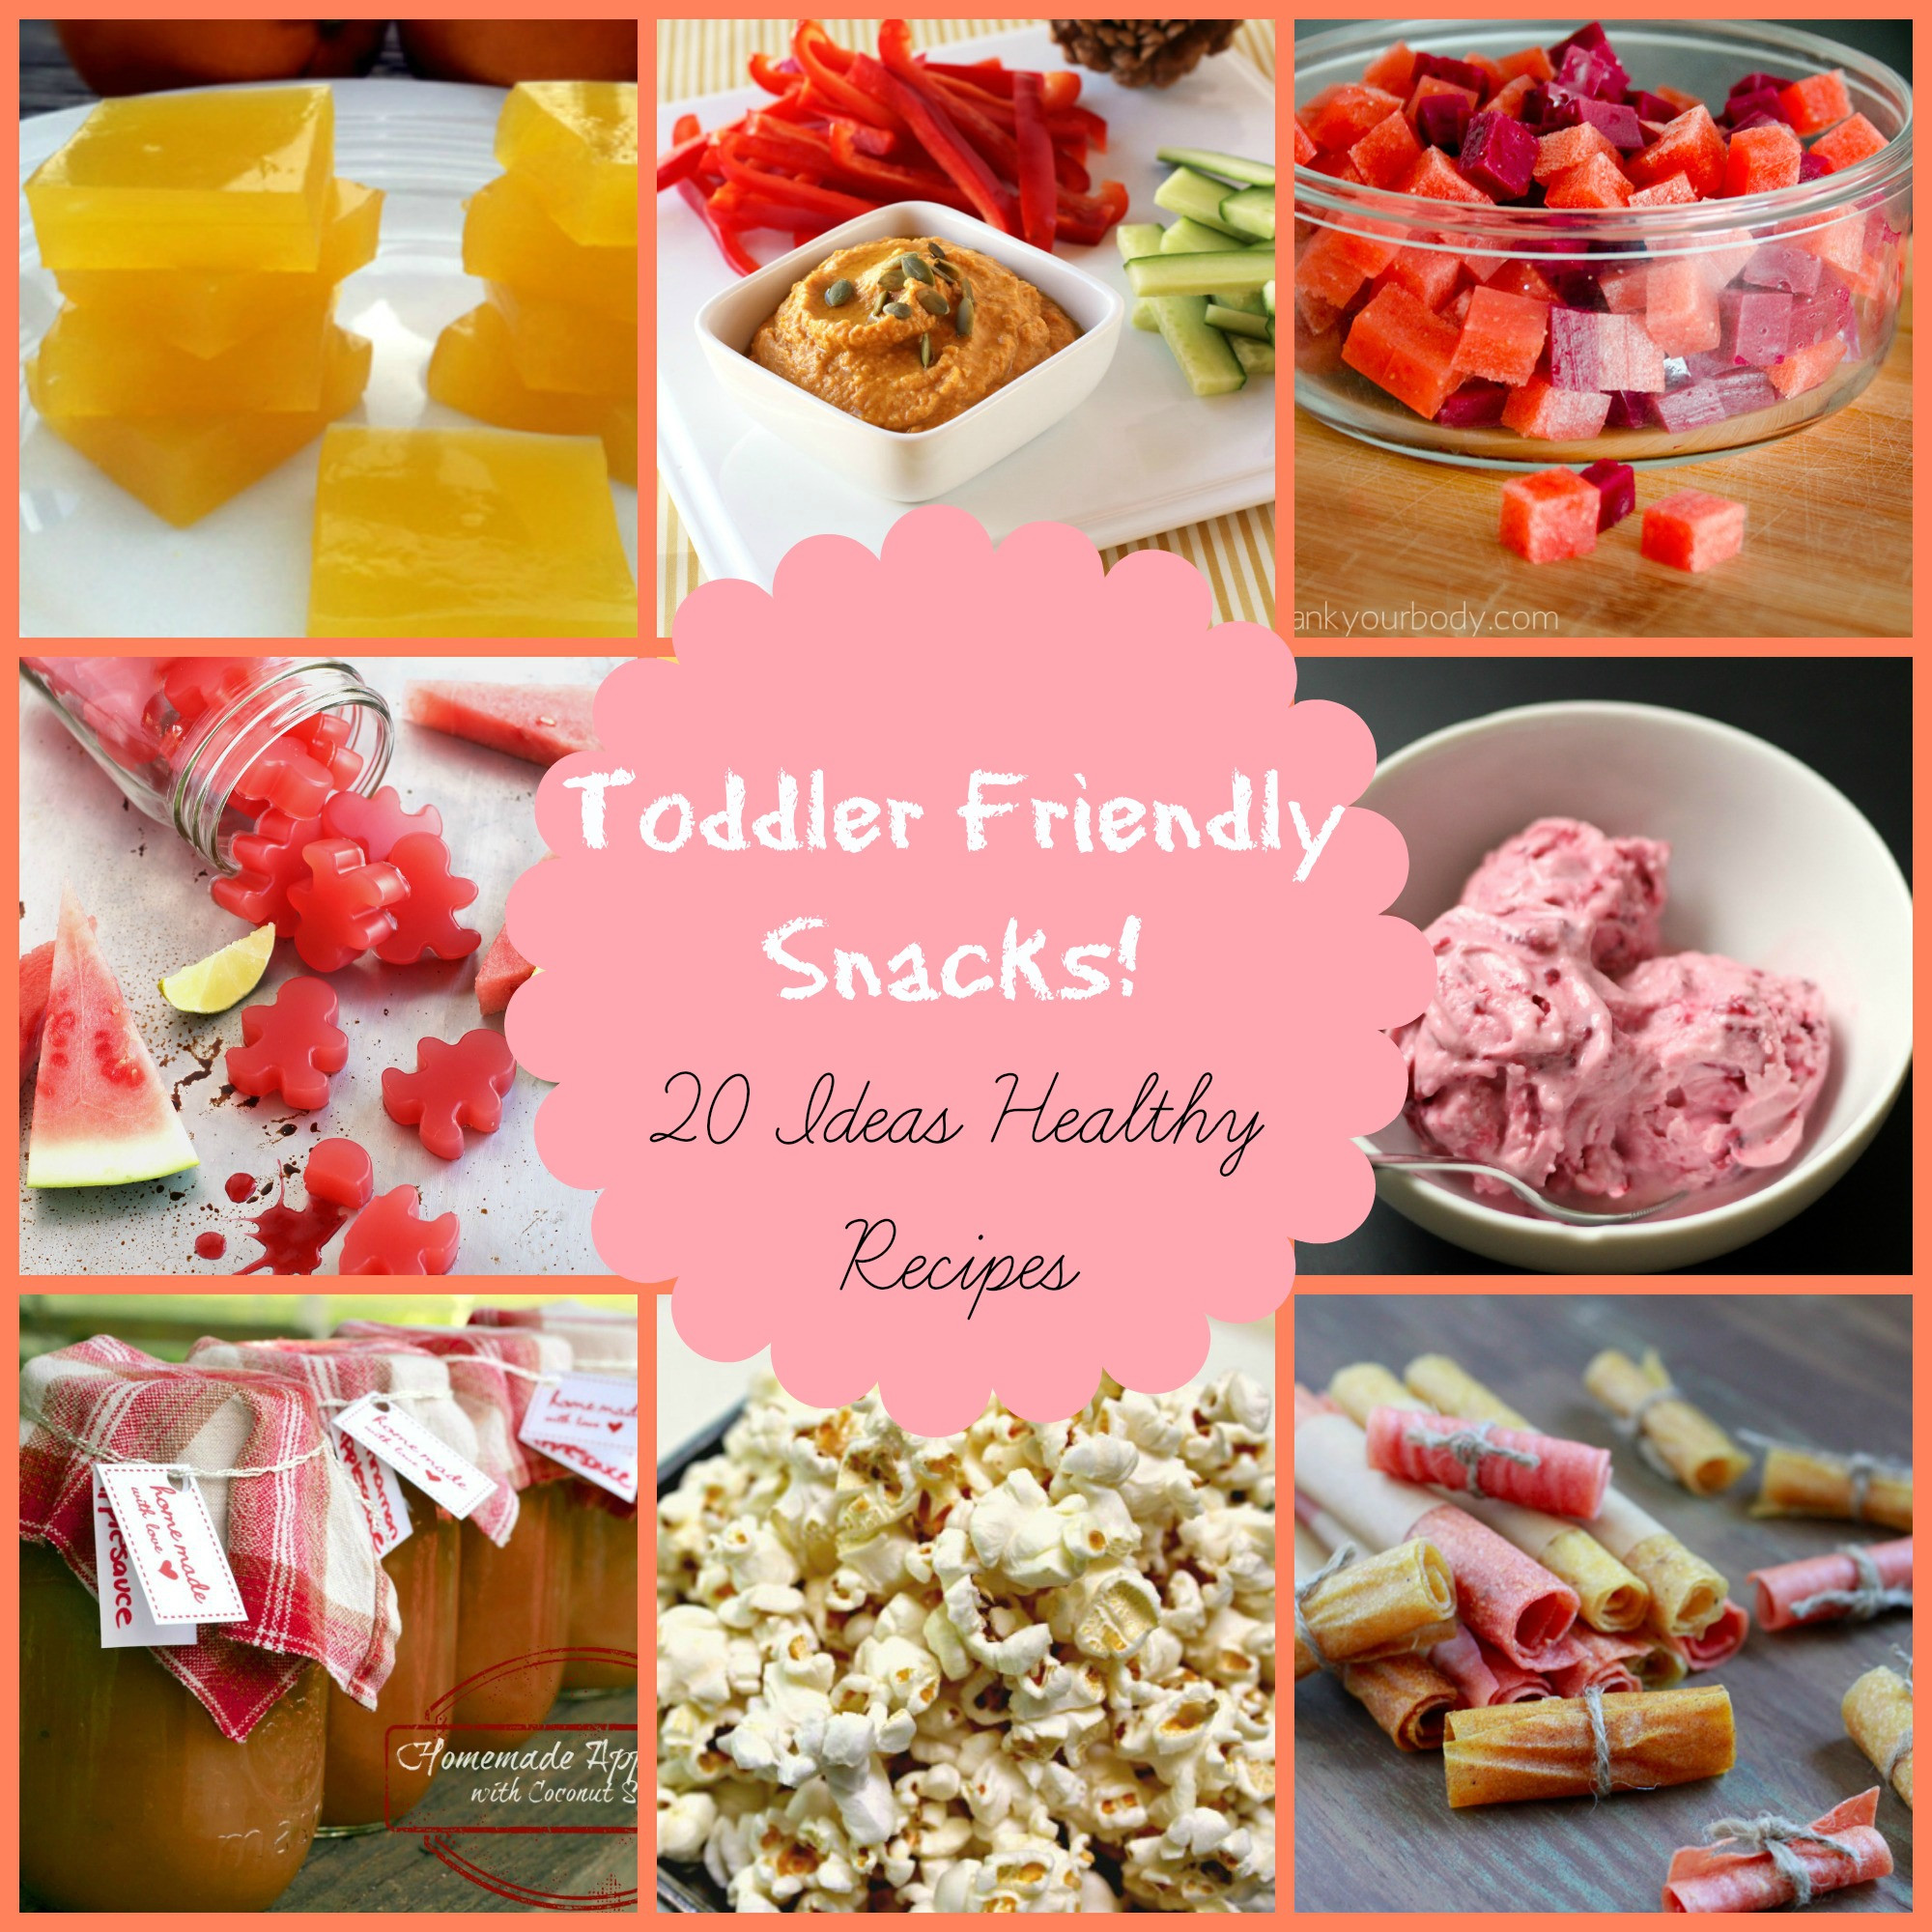 Healthy Toddler Snacks On The Go
 Healthy Snacks for Kids 20 toddler friendly ideas